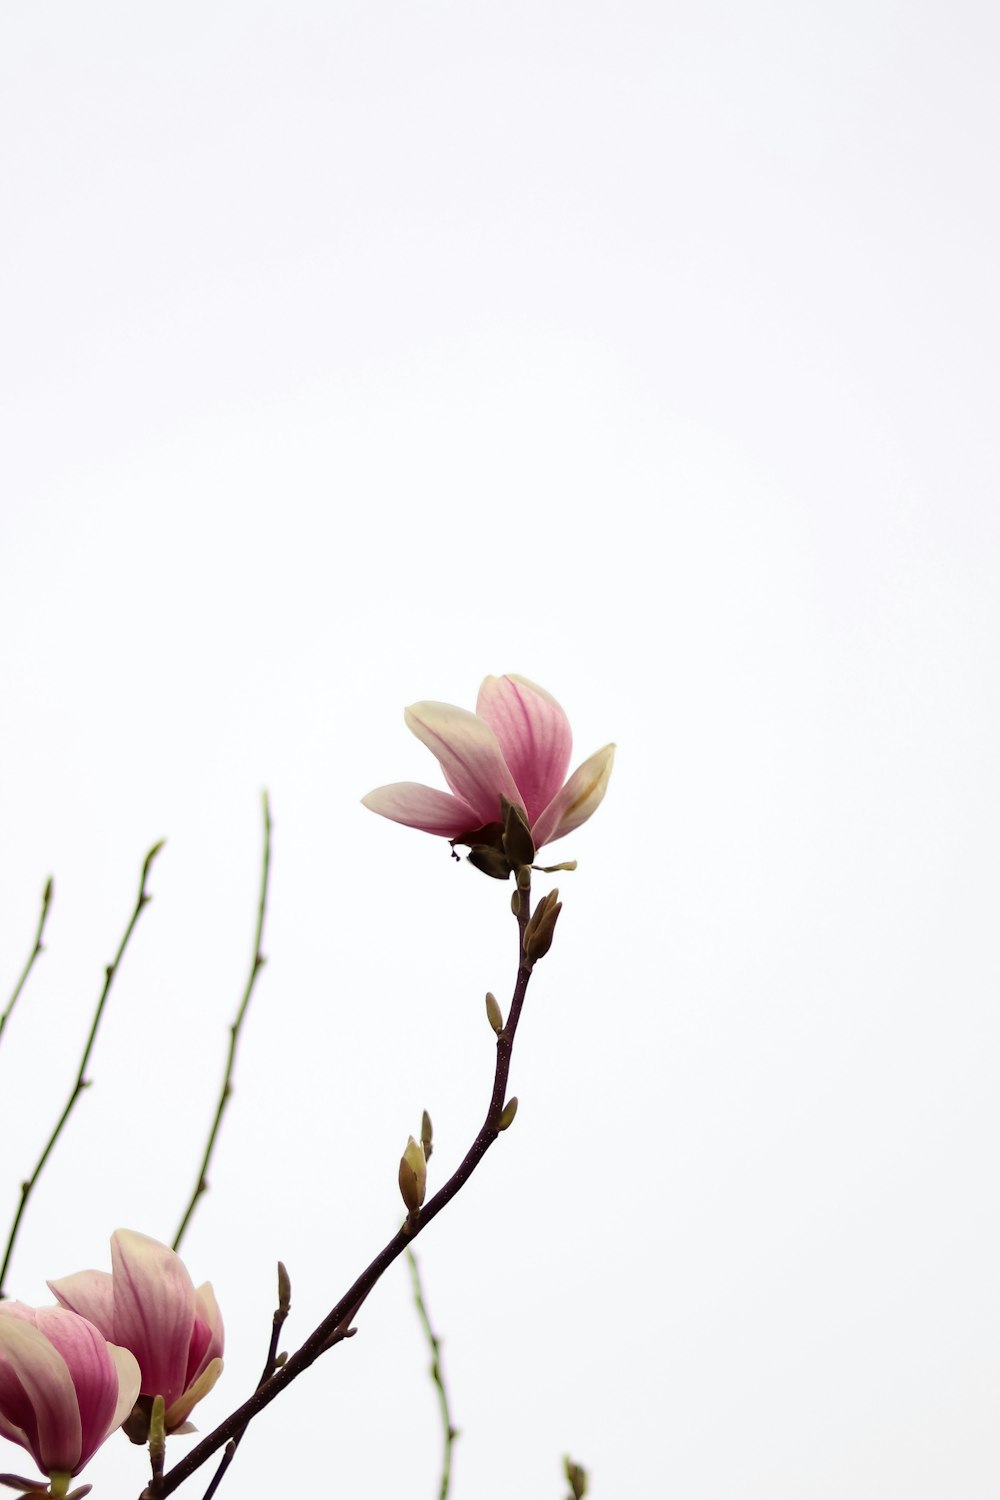 a branch with pink flowers on it against a white sky